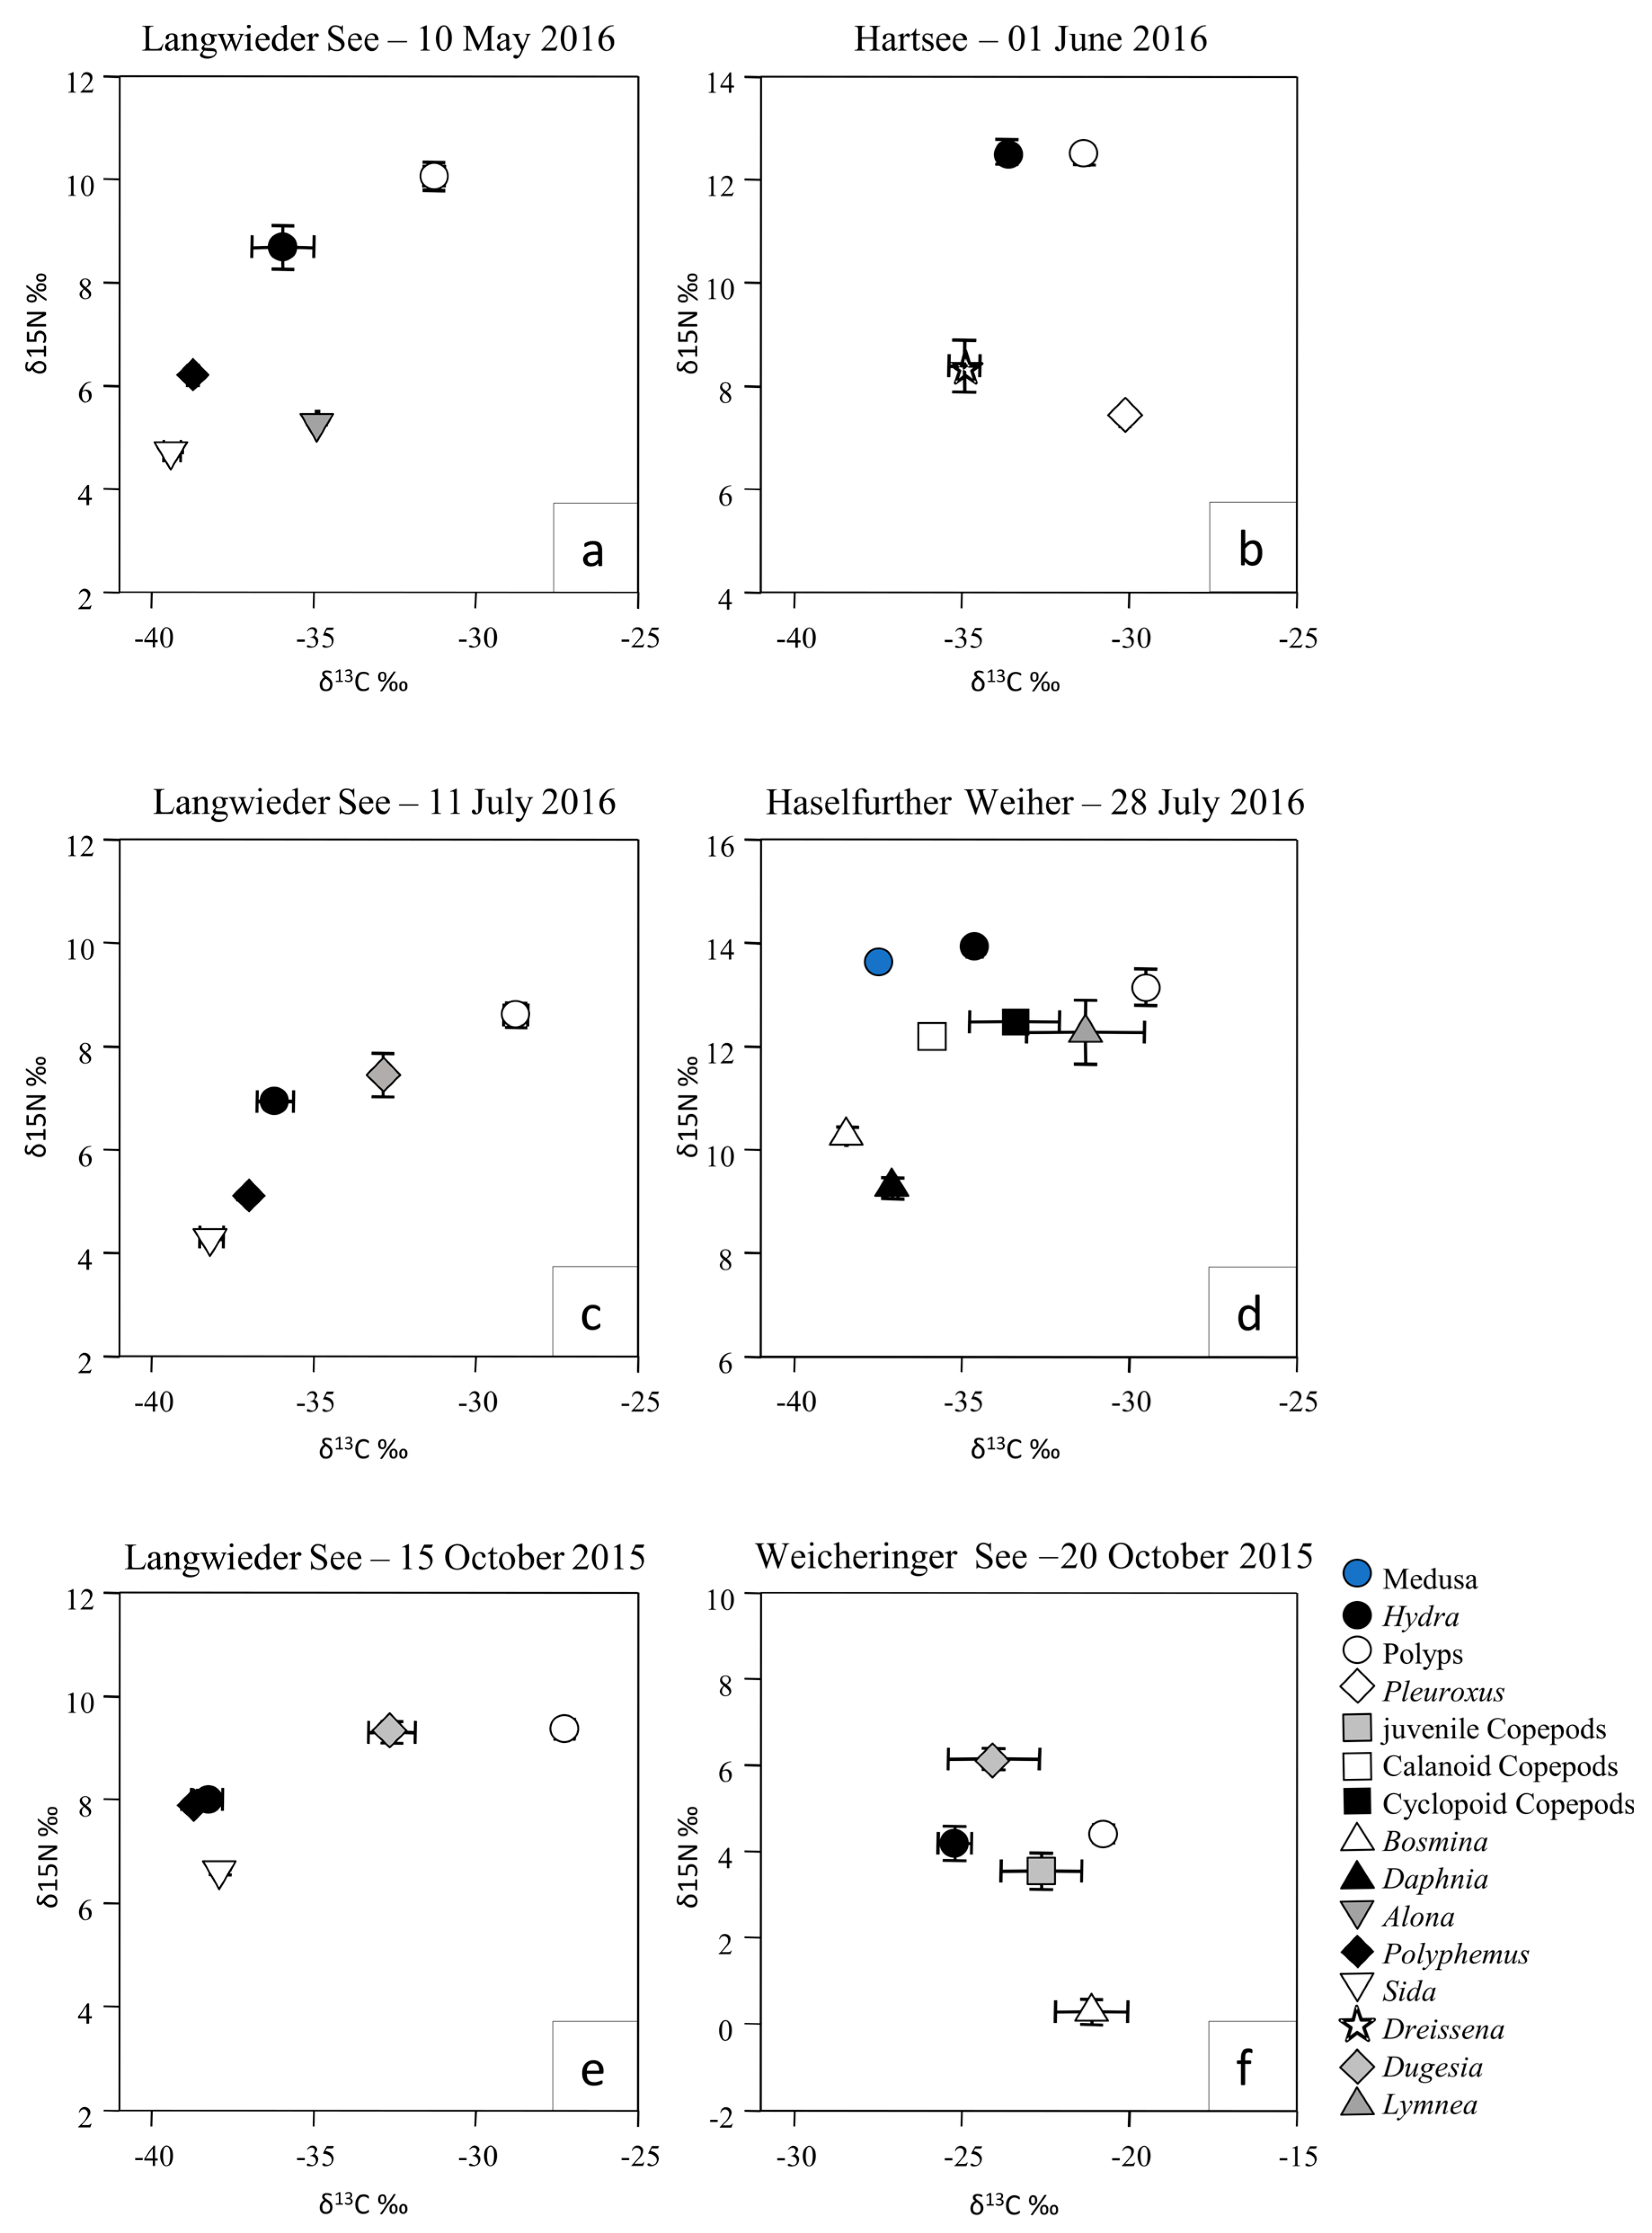 Biology Free Full-Text Trophic Positions of Polyp and Medusa Stages of the Freshwater Jellyfish Craspedacusta sowerbii Based on Stable Isotope Analysis